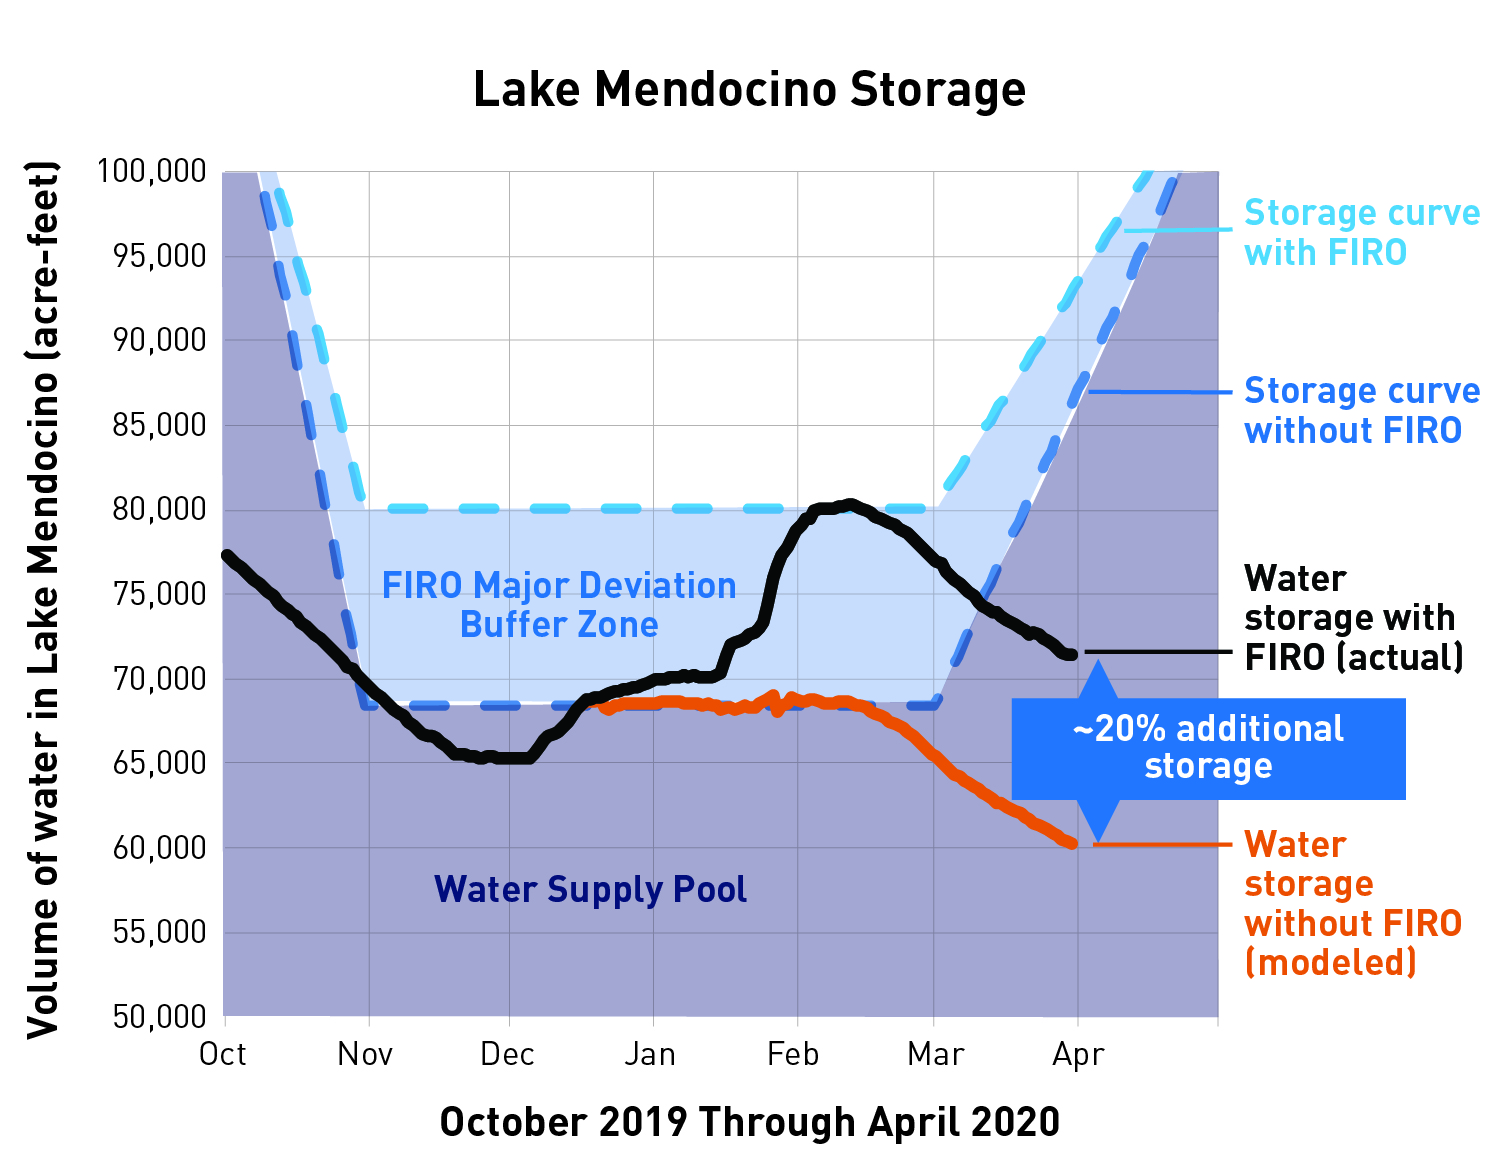 FIRO_Lake_Mendocino_FVA Center for Western Weather and Water Extremes